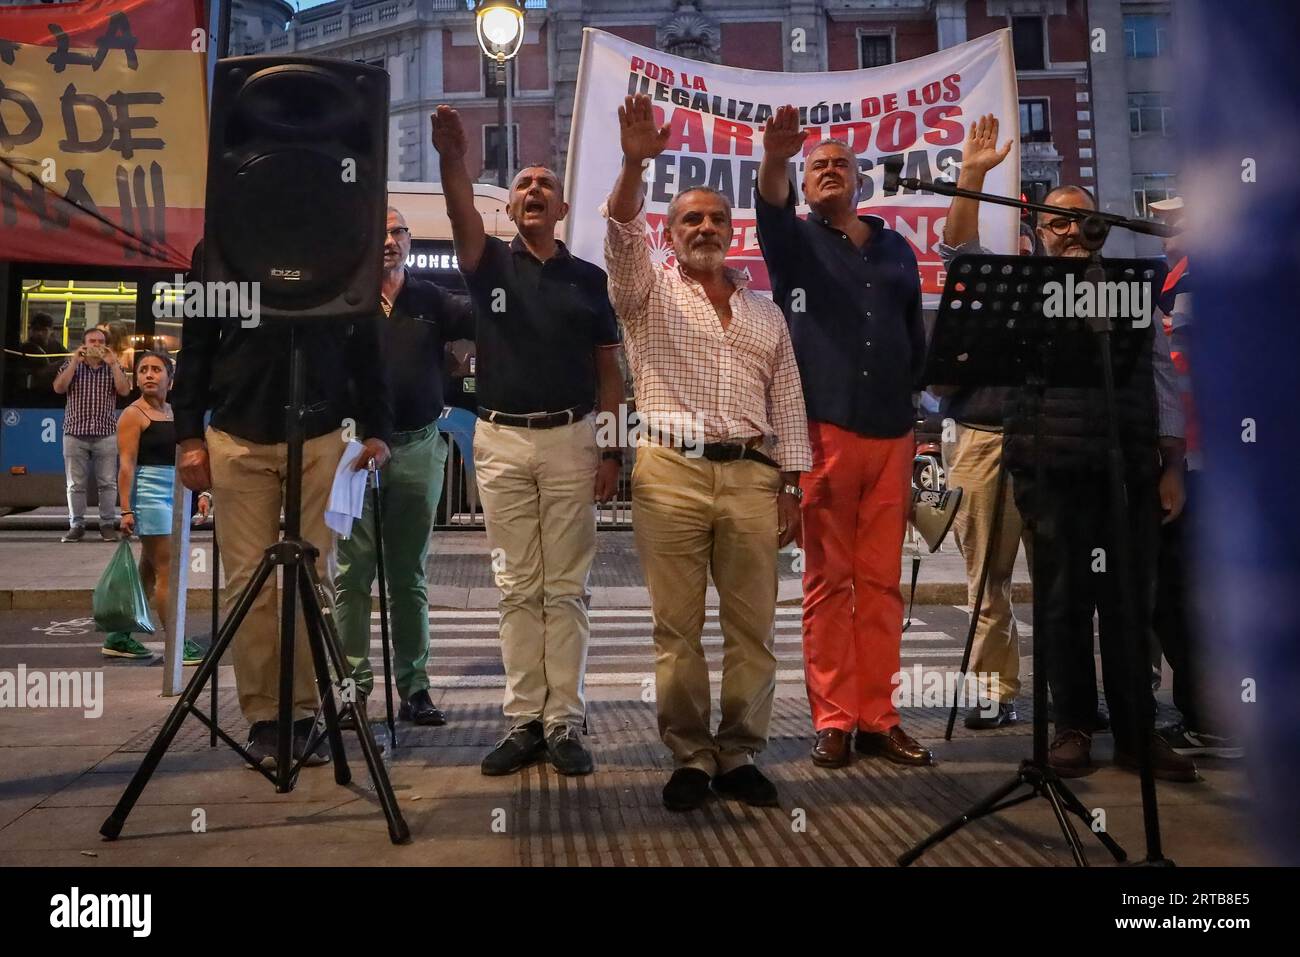 Madrid, Spain. 11th Sep, 2023. A group of Falangists perform a fascist salute during the rally. The Spanish Falange, a far-right group, gathered in front of the Blanquerna Catalan bookstore and cultural center located on Alcala Street in Madrid to demand the illegalization of separatist parties in Spanish territory. The event was held taking advantage of September 11, the national day of Catalonia, also known as Diada. Credit: SOPA Images Limited/Alamy Live News Stock Photo